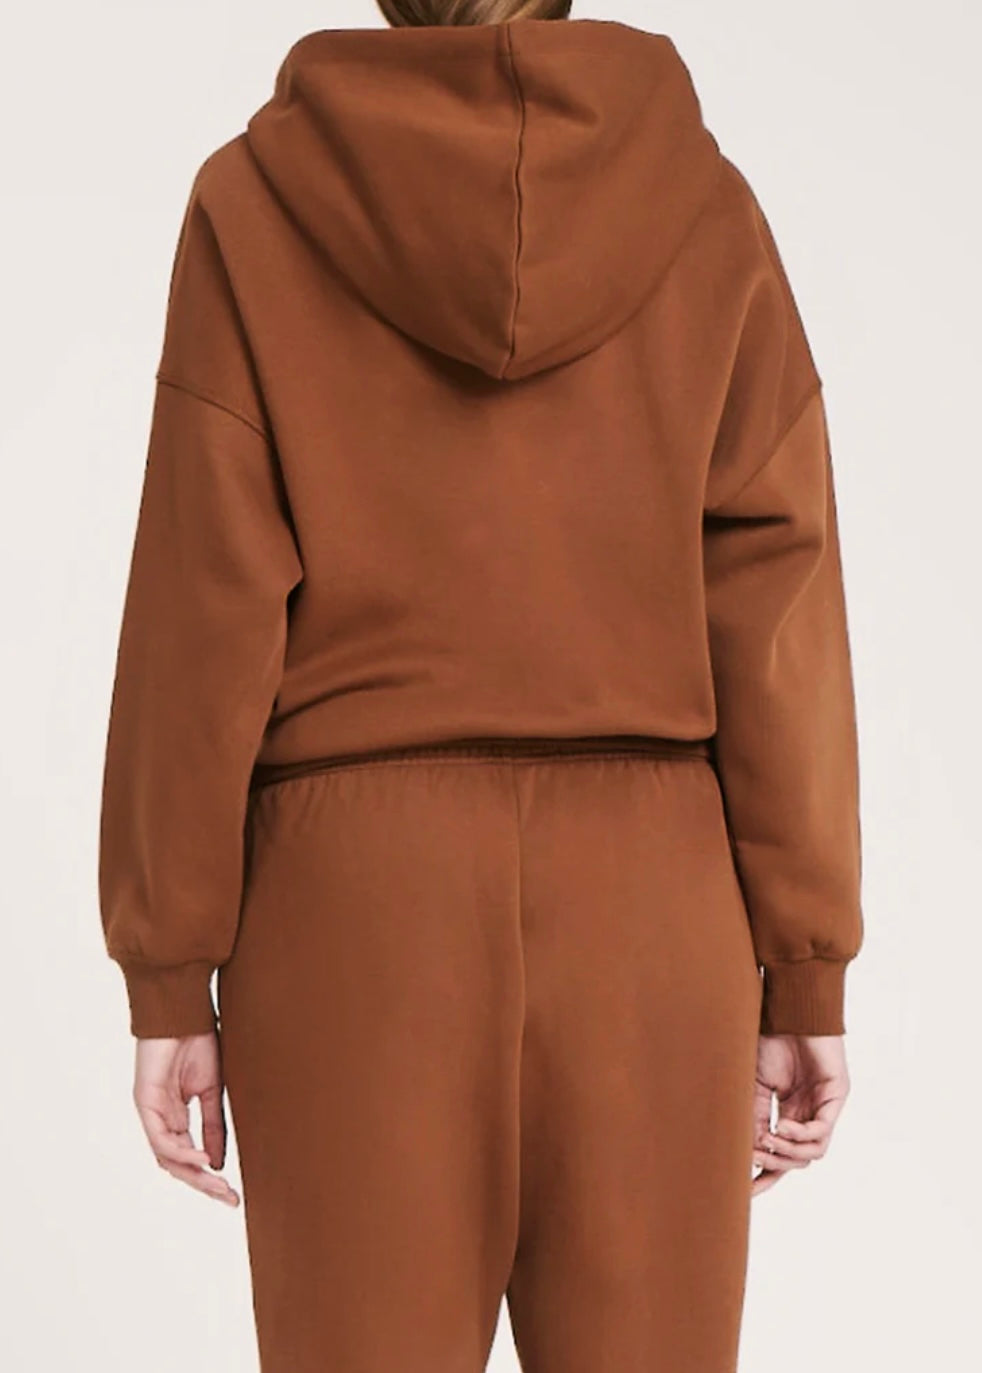 Nude Lucy - Carter Classic Hoodie - Toffee